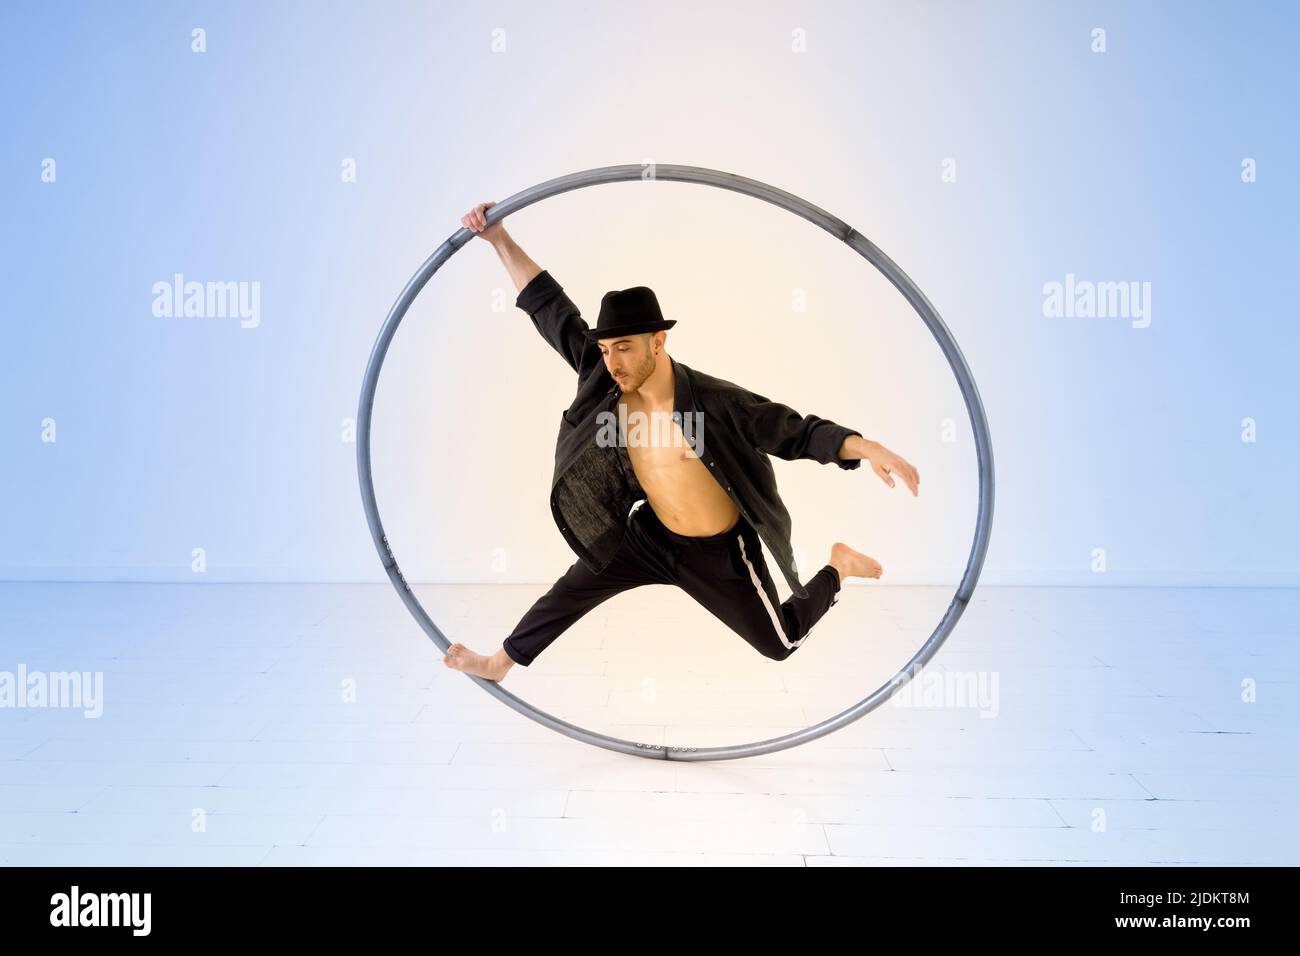 Full body of active male acrobat performing trick with cyr wheel while standing on one leg with raised arm against light background Stock Photo